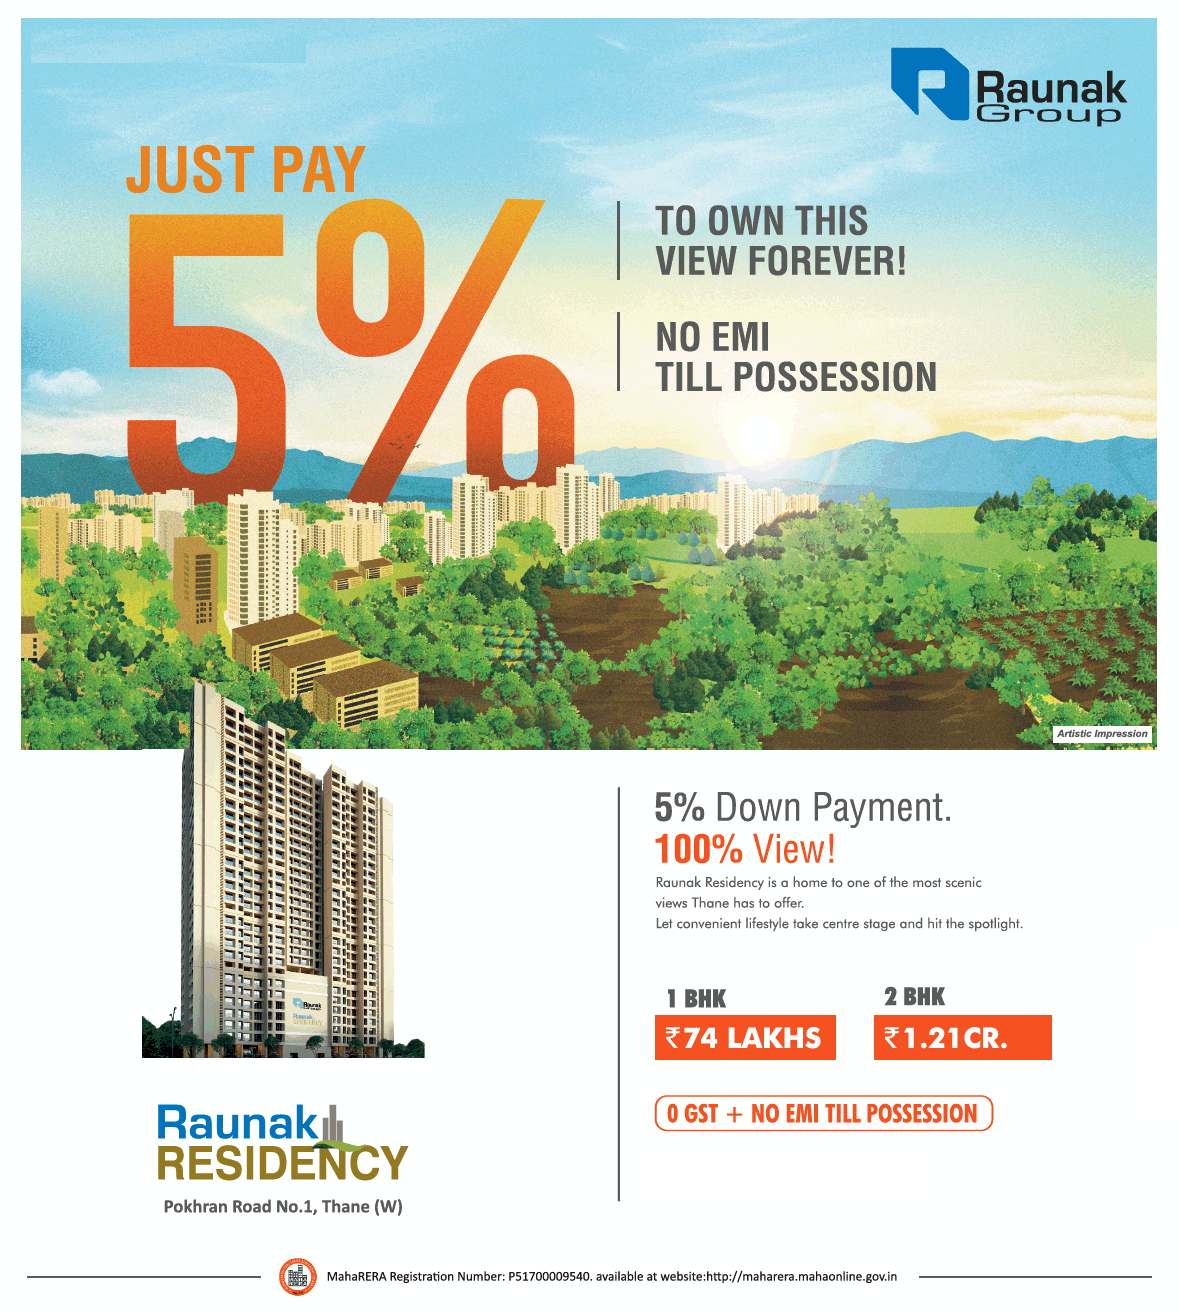 Pay 5% to book & no EMI till possession at Raunak Residency in Mumbai Update